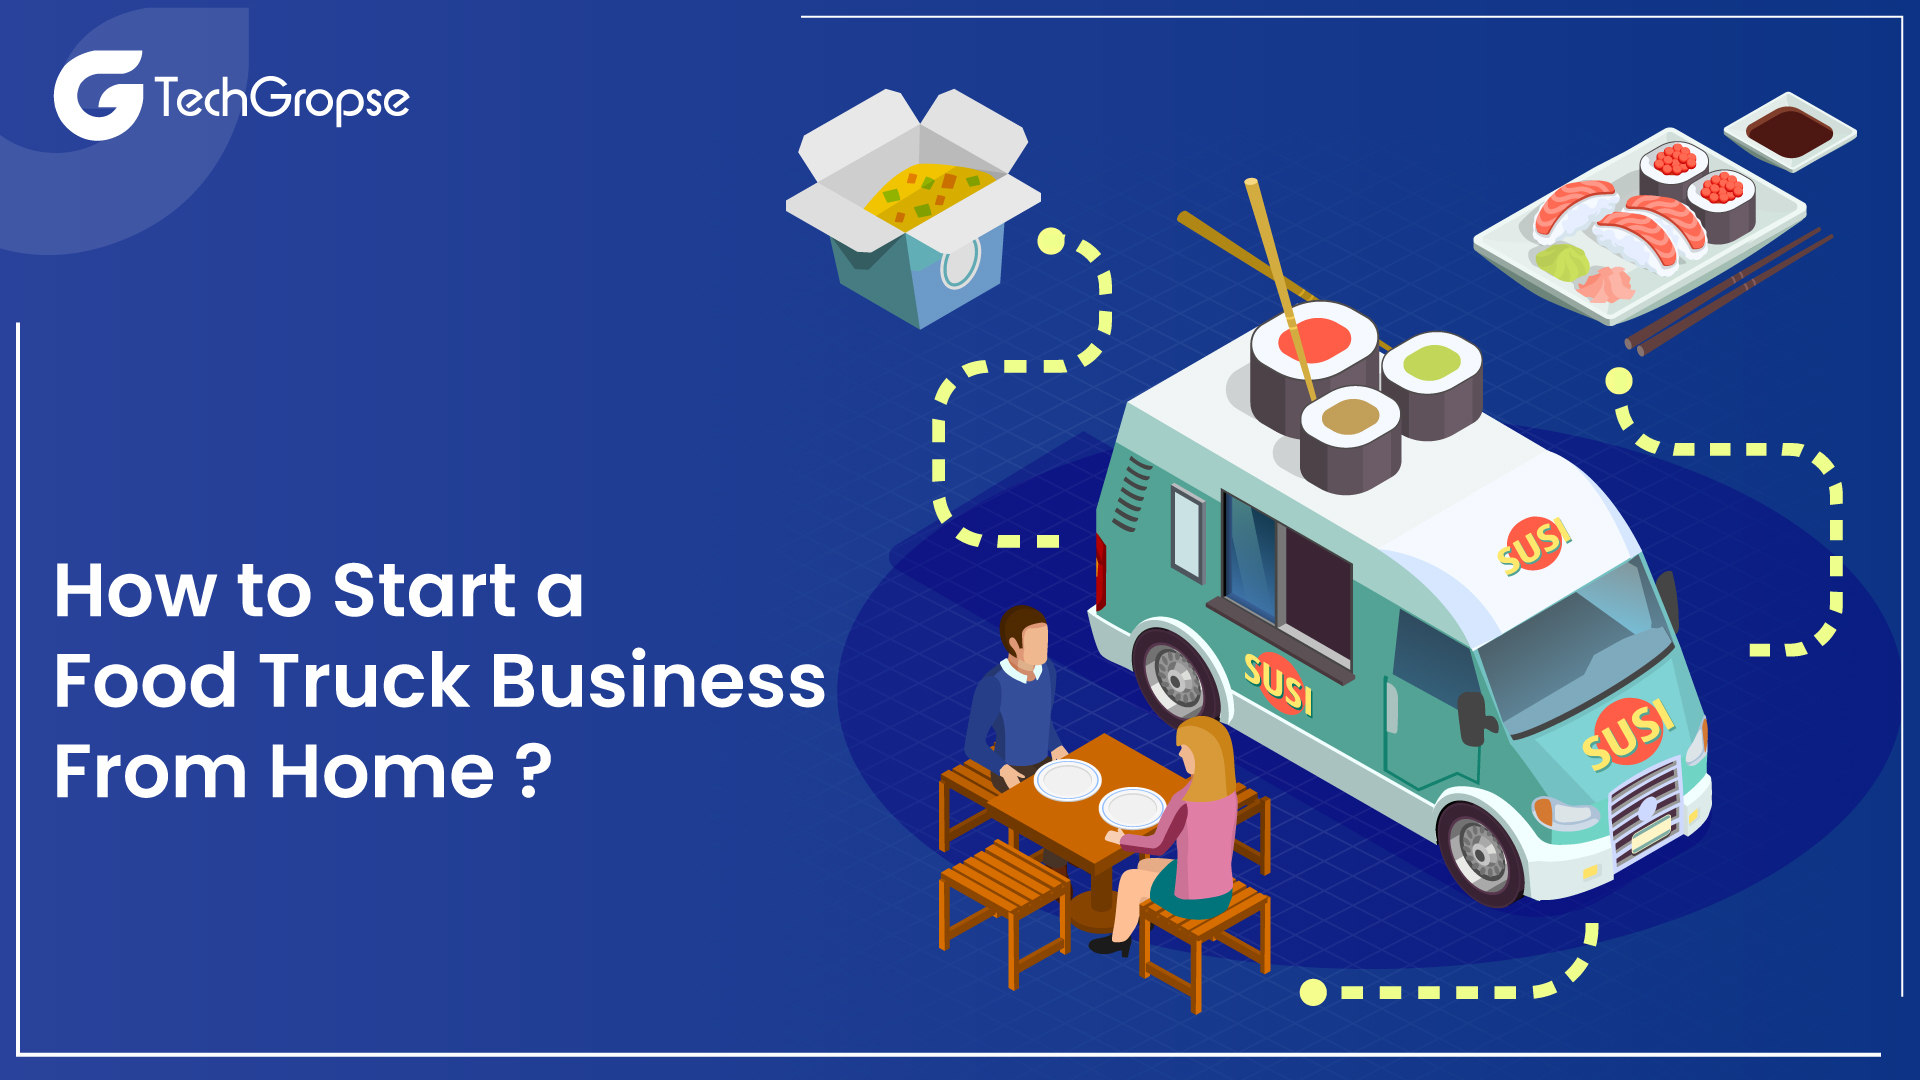 How to Start a Food Truck Business From Home